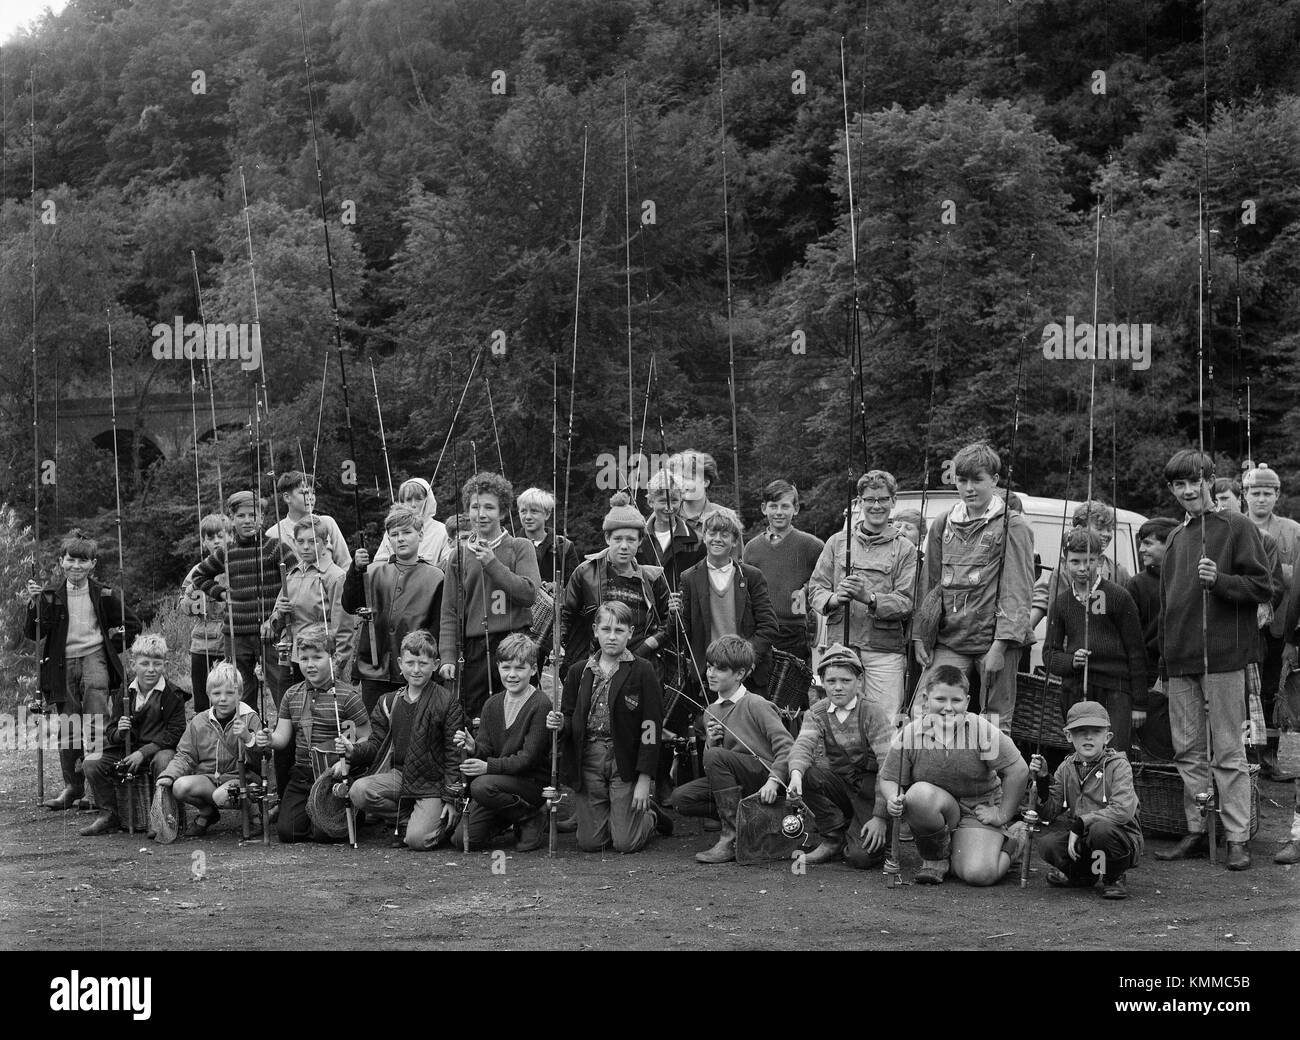 Junior Anglers club fishing day out 1960s Stock Photo